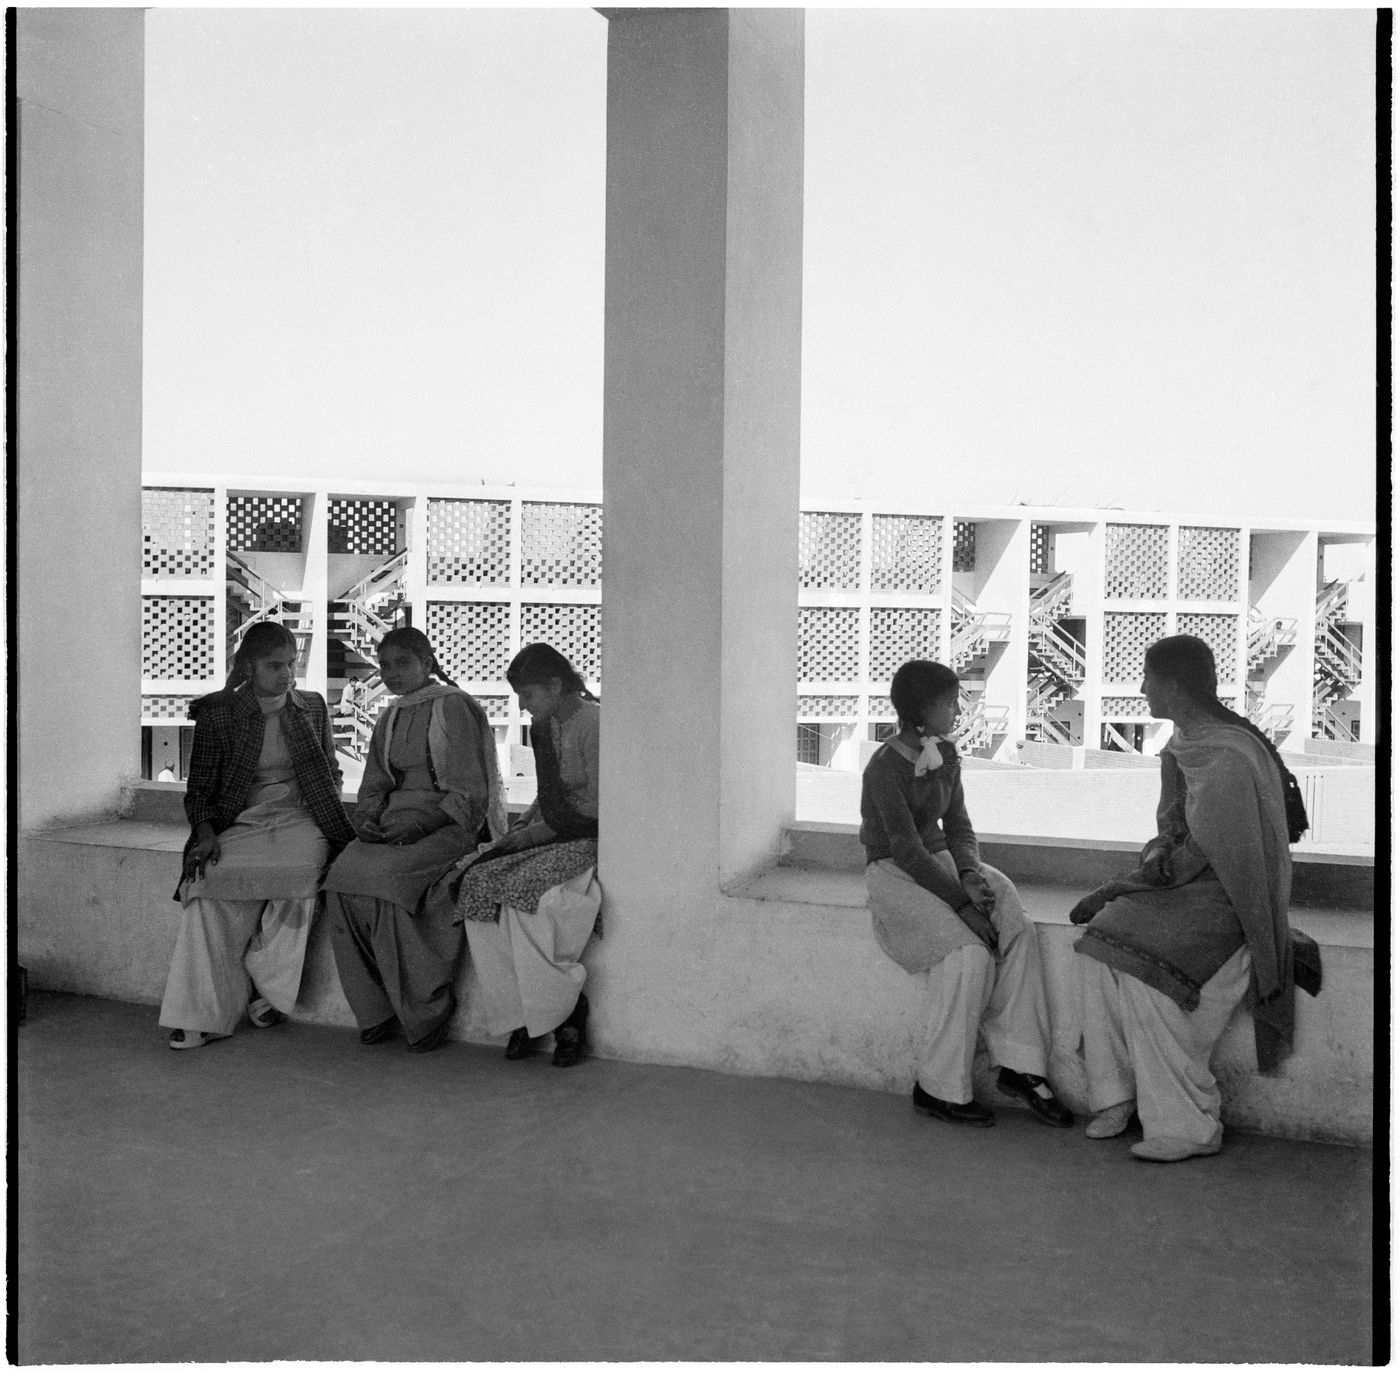 Students at Junior Secondary School-II, Sector 22, Chandigarh, India